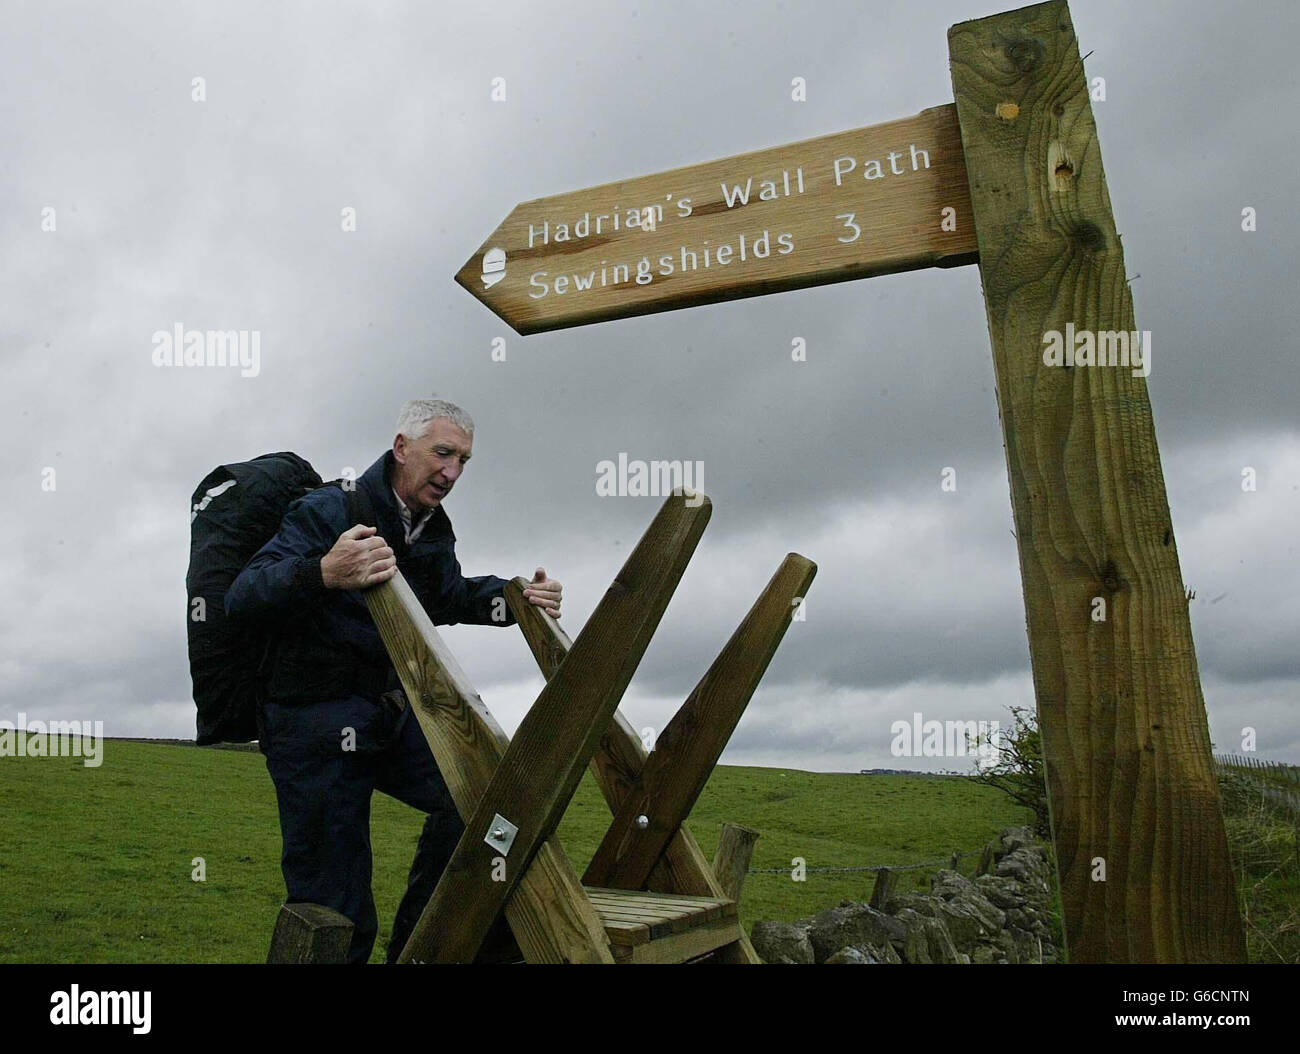 A walker on Hadrian's Wall where, for the first time in 1600 years, hikers will be able to follow the entire length of the wall - 84 miles - along an unbroken path. * The Hadrian's Wall Path is part of a 6million investment by the Countryside Agency, and is expected to attract 20,000 people a year by 2006. Hadrian's Wall - a World Heritage Site - was built by the Romans from 122 AD as one of the most northerly frontiers of their empire. Stock Photo